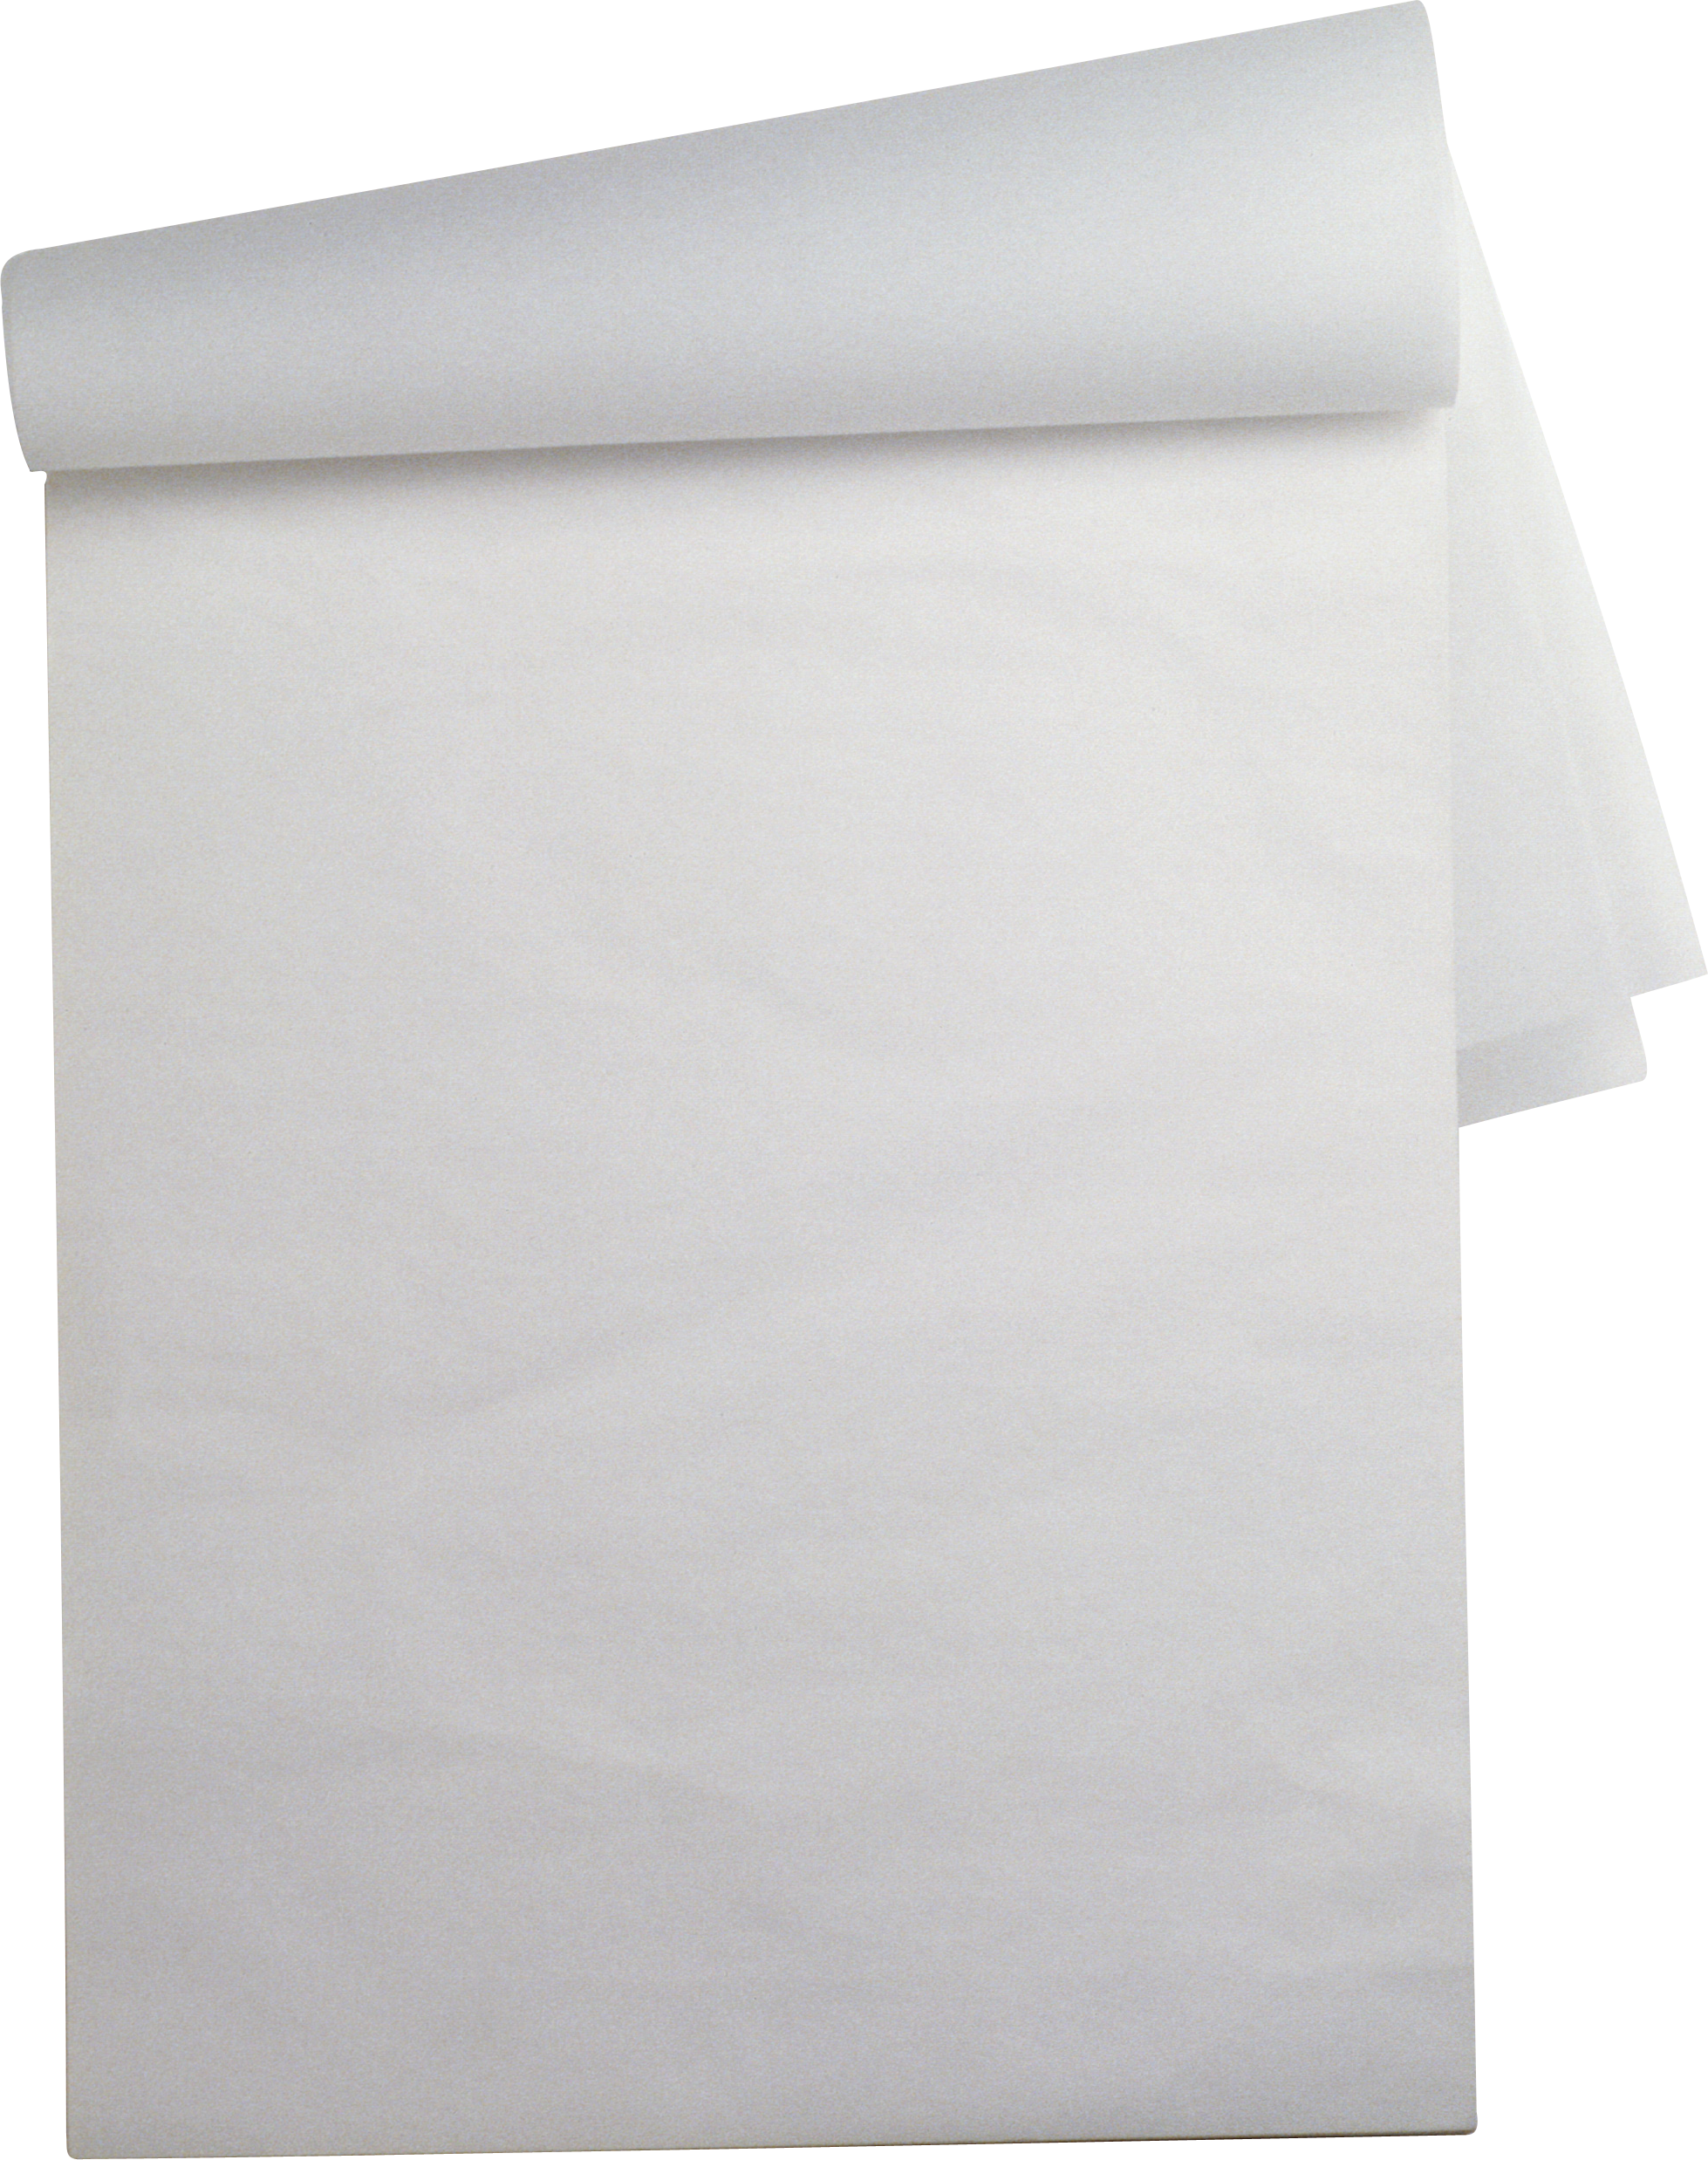 Paper Sheet Note PNG HD Quality